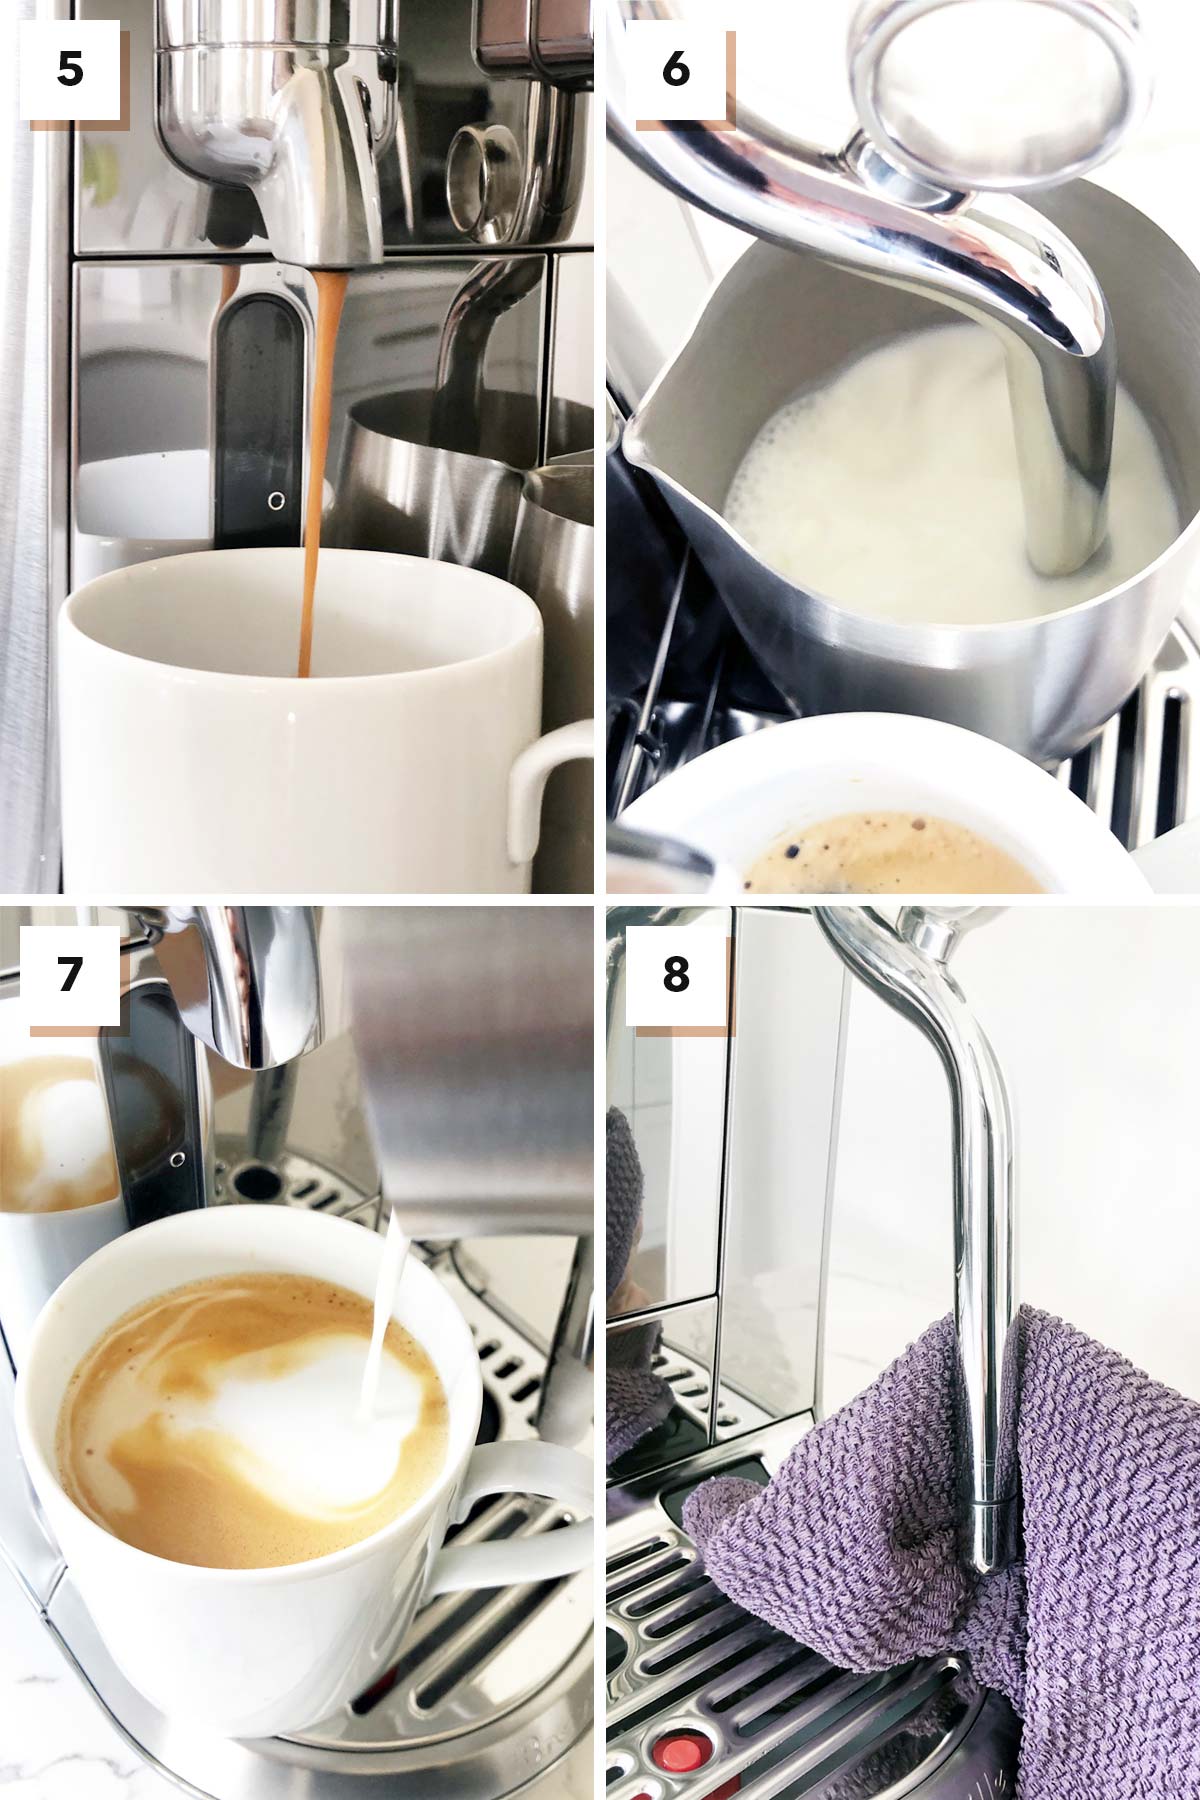 Nespresso Creatista Plus second part of step-by-step to making your first latte drink.